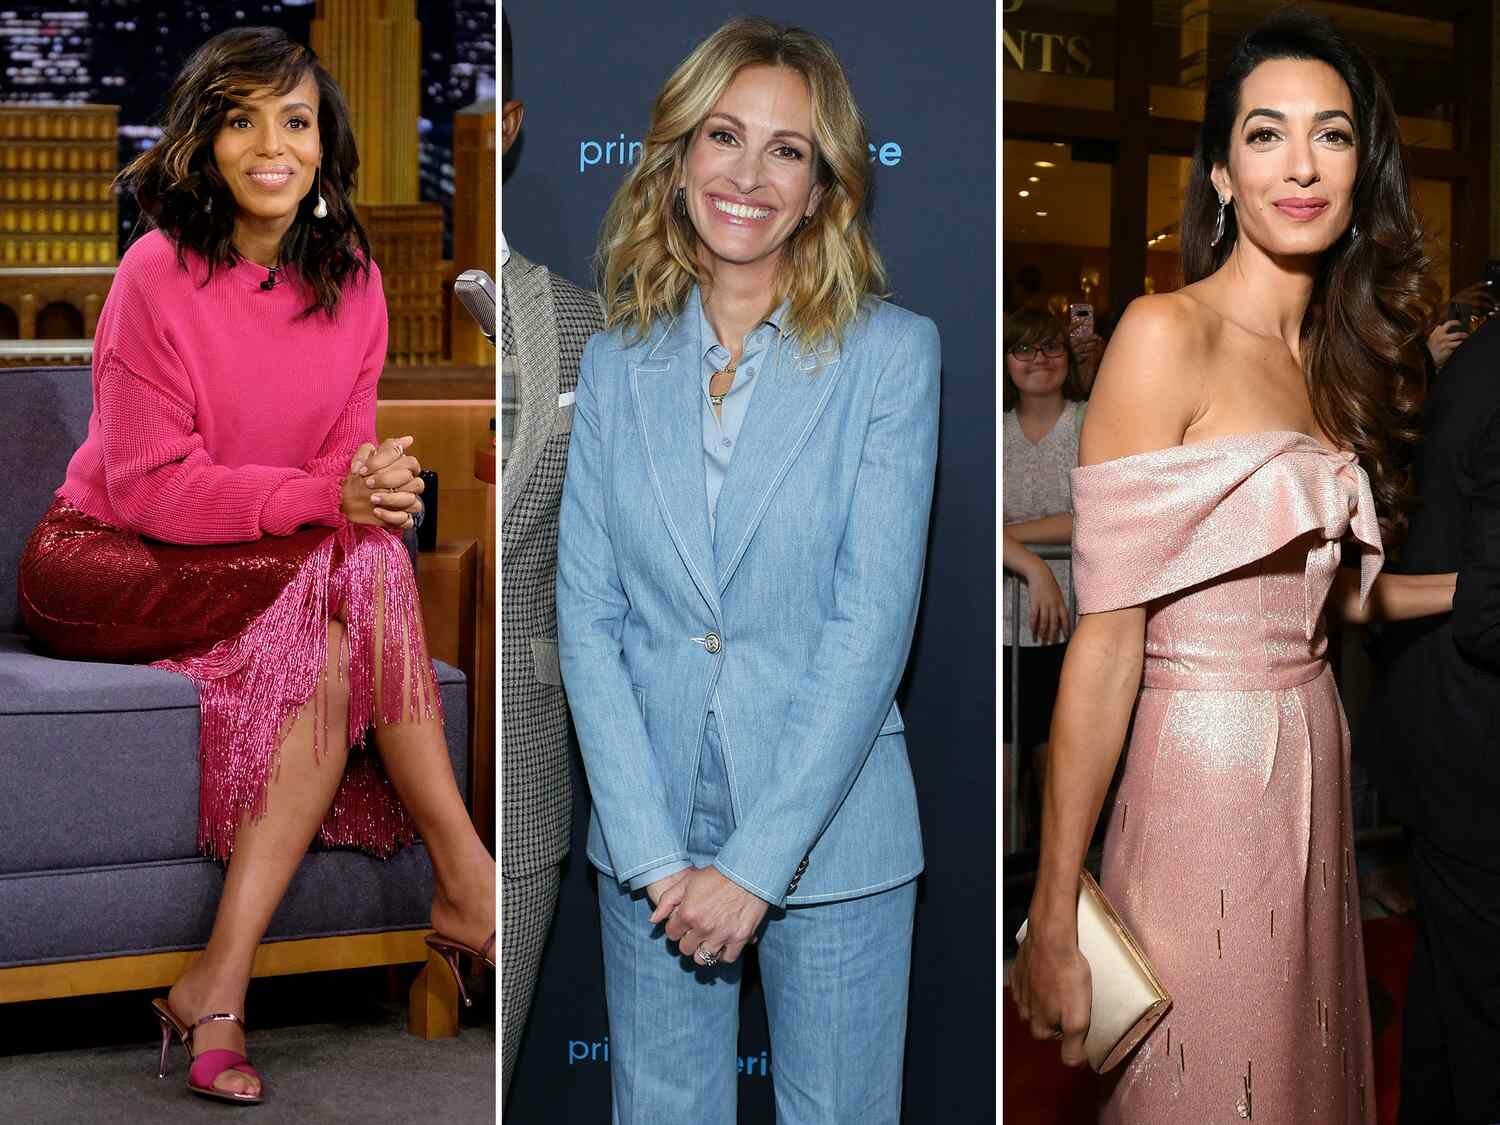 kerry washington, julia roberts, amal clooney in colored outfits for neutral skin tones